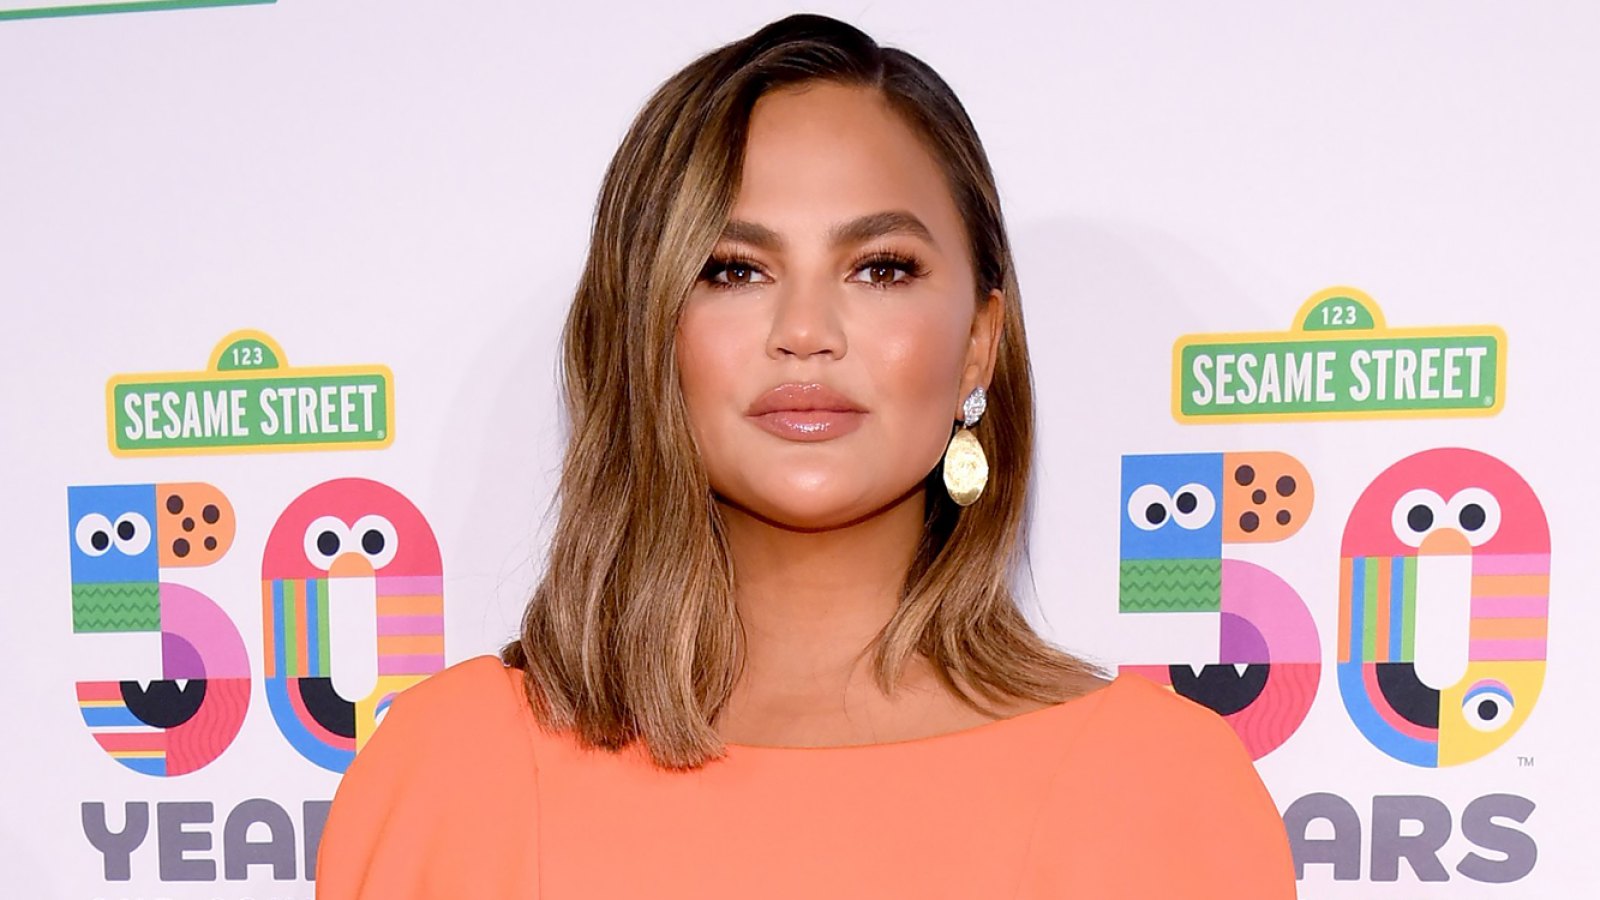 Chrissy Teigen Gets Emotional About Postpartum Body After Miscarriage: 'Your Body Just Pauses'